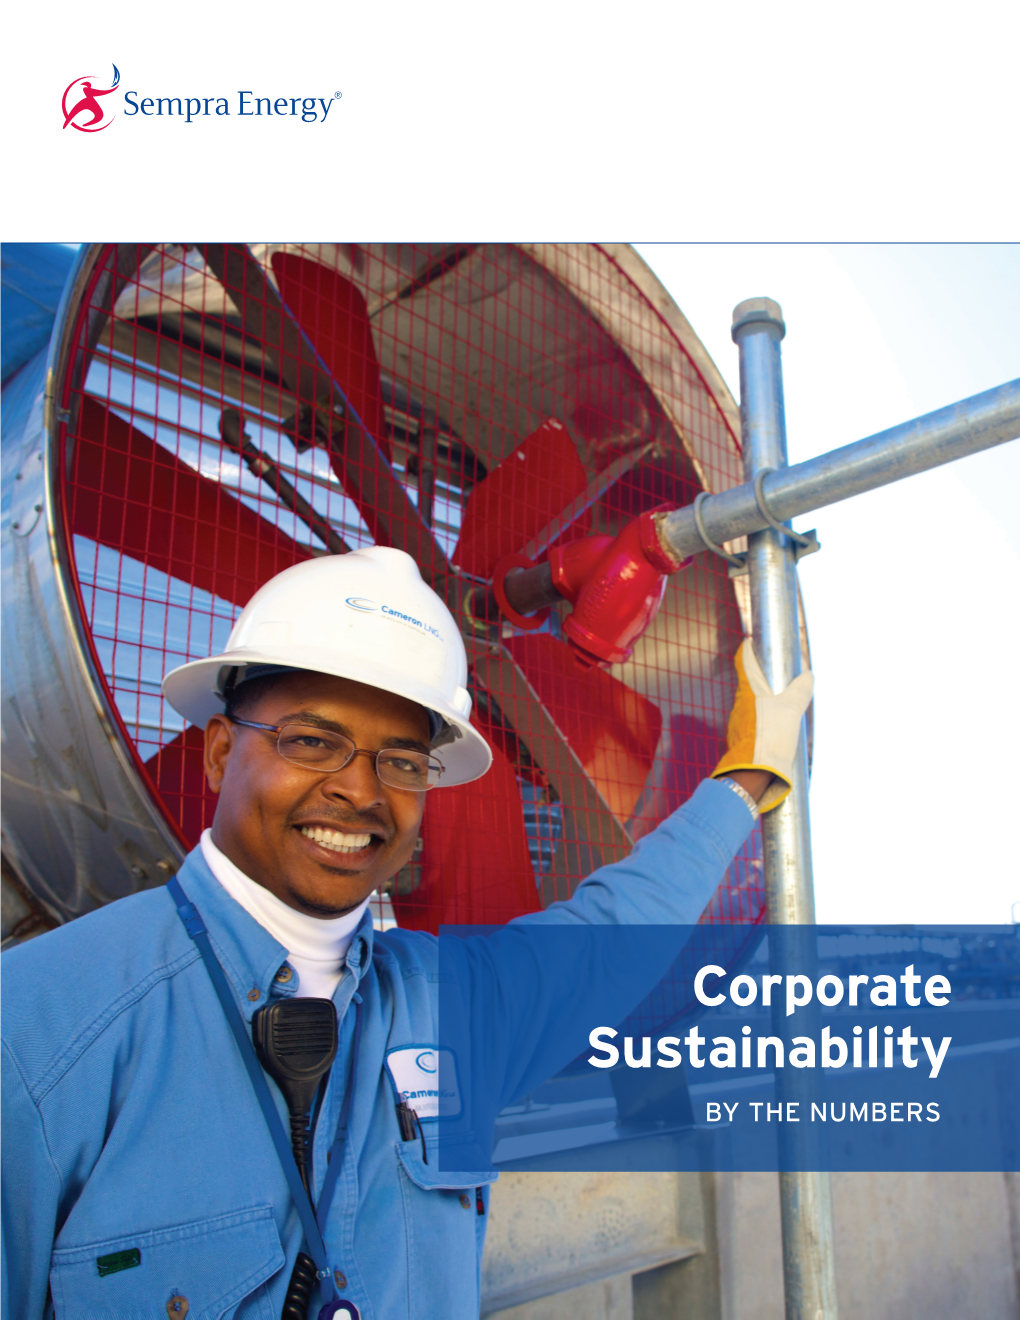 Corporate Sustainability by the NUMBERS “Corporate Sustainability – by the Numbers” Is an Overview of Sempra Energy’S Performance1 in Key Areas